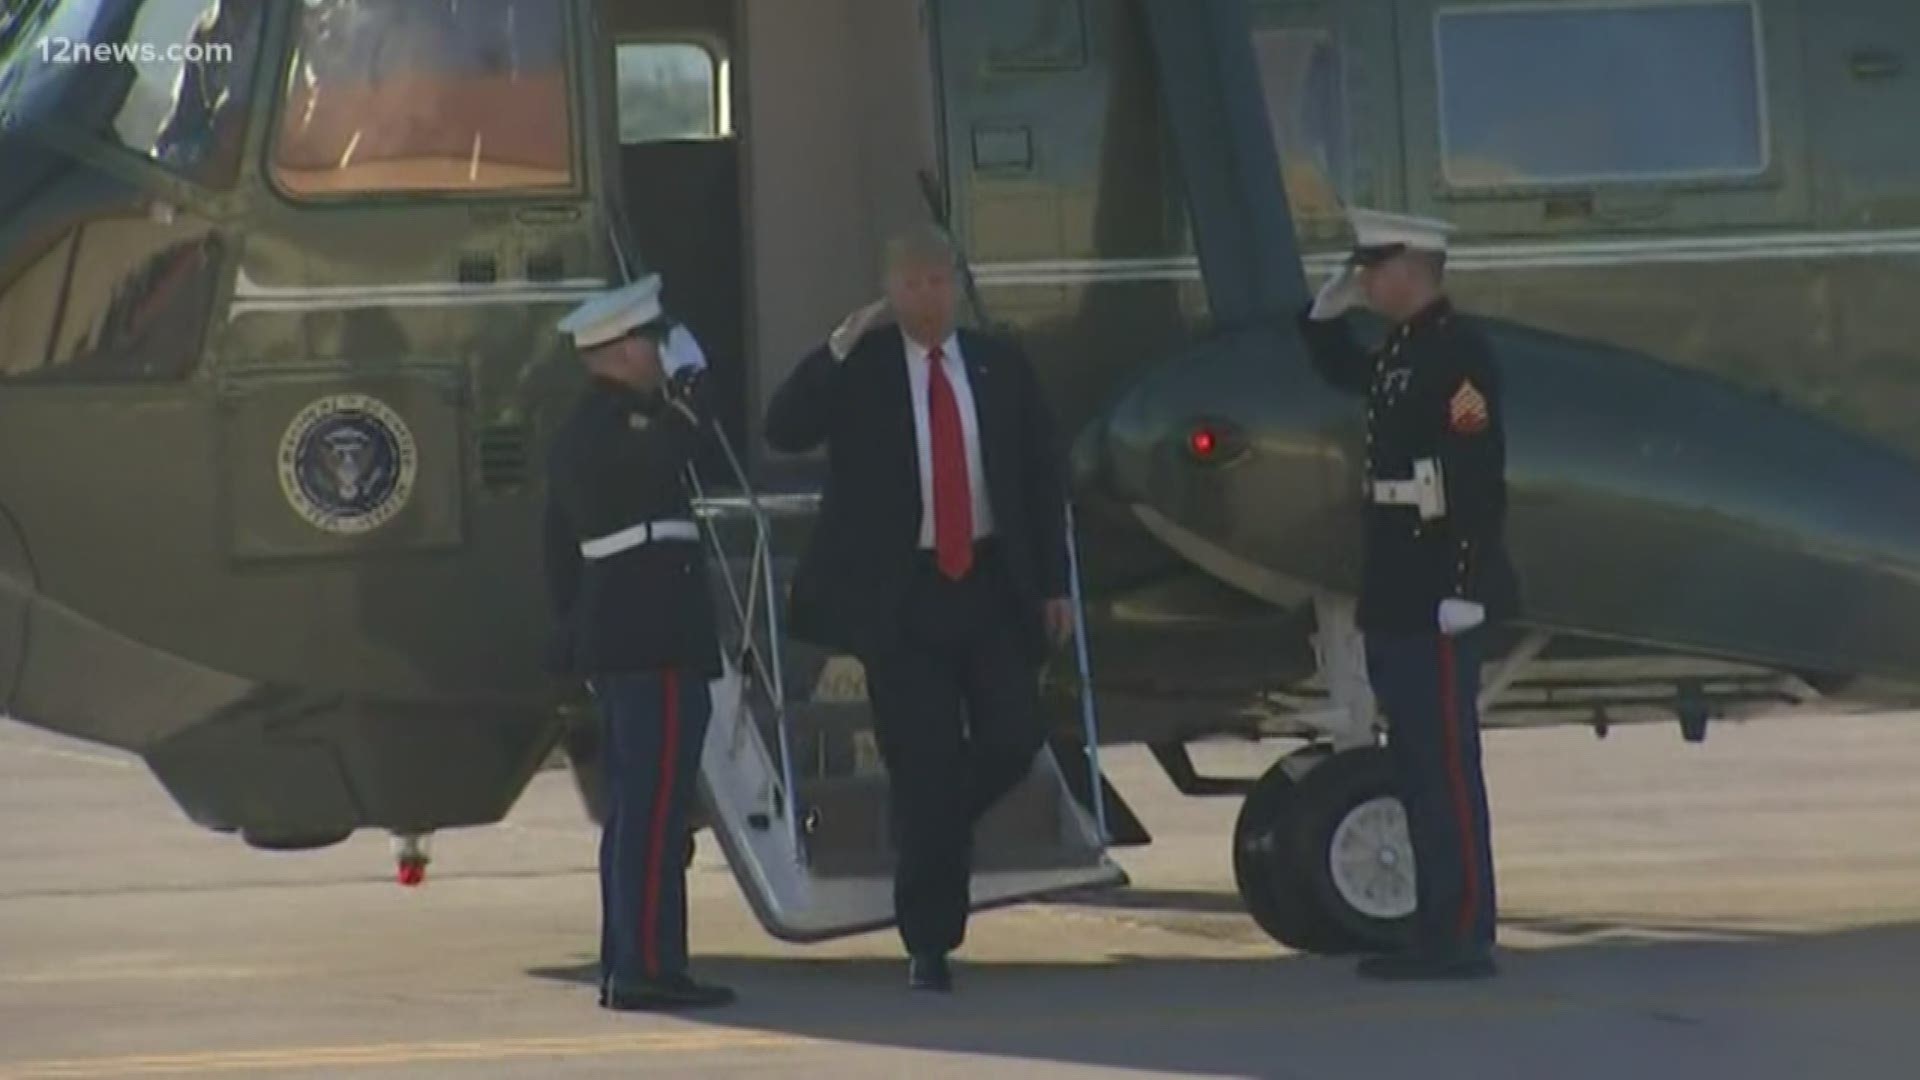 The president is in the Valley for a campaign event for Senate candidate Martha McSally. The president is at Luke Air Force Base to take a tour of the base and for a round table discussion.